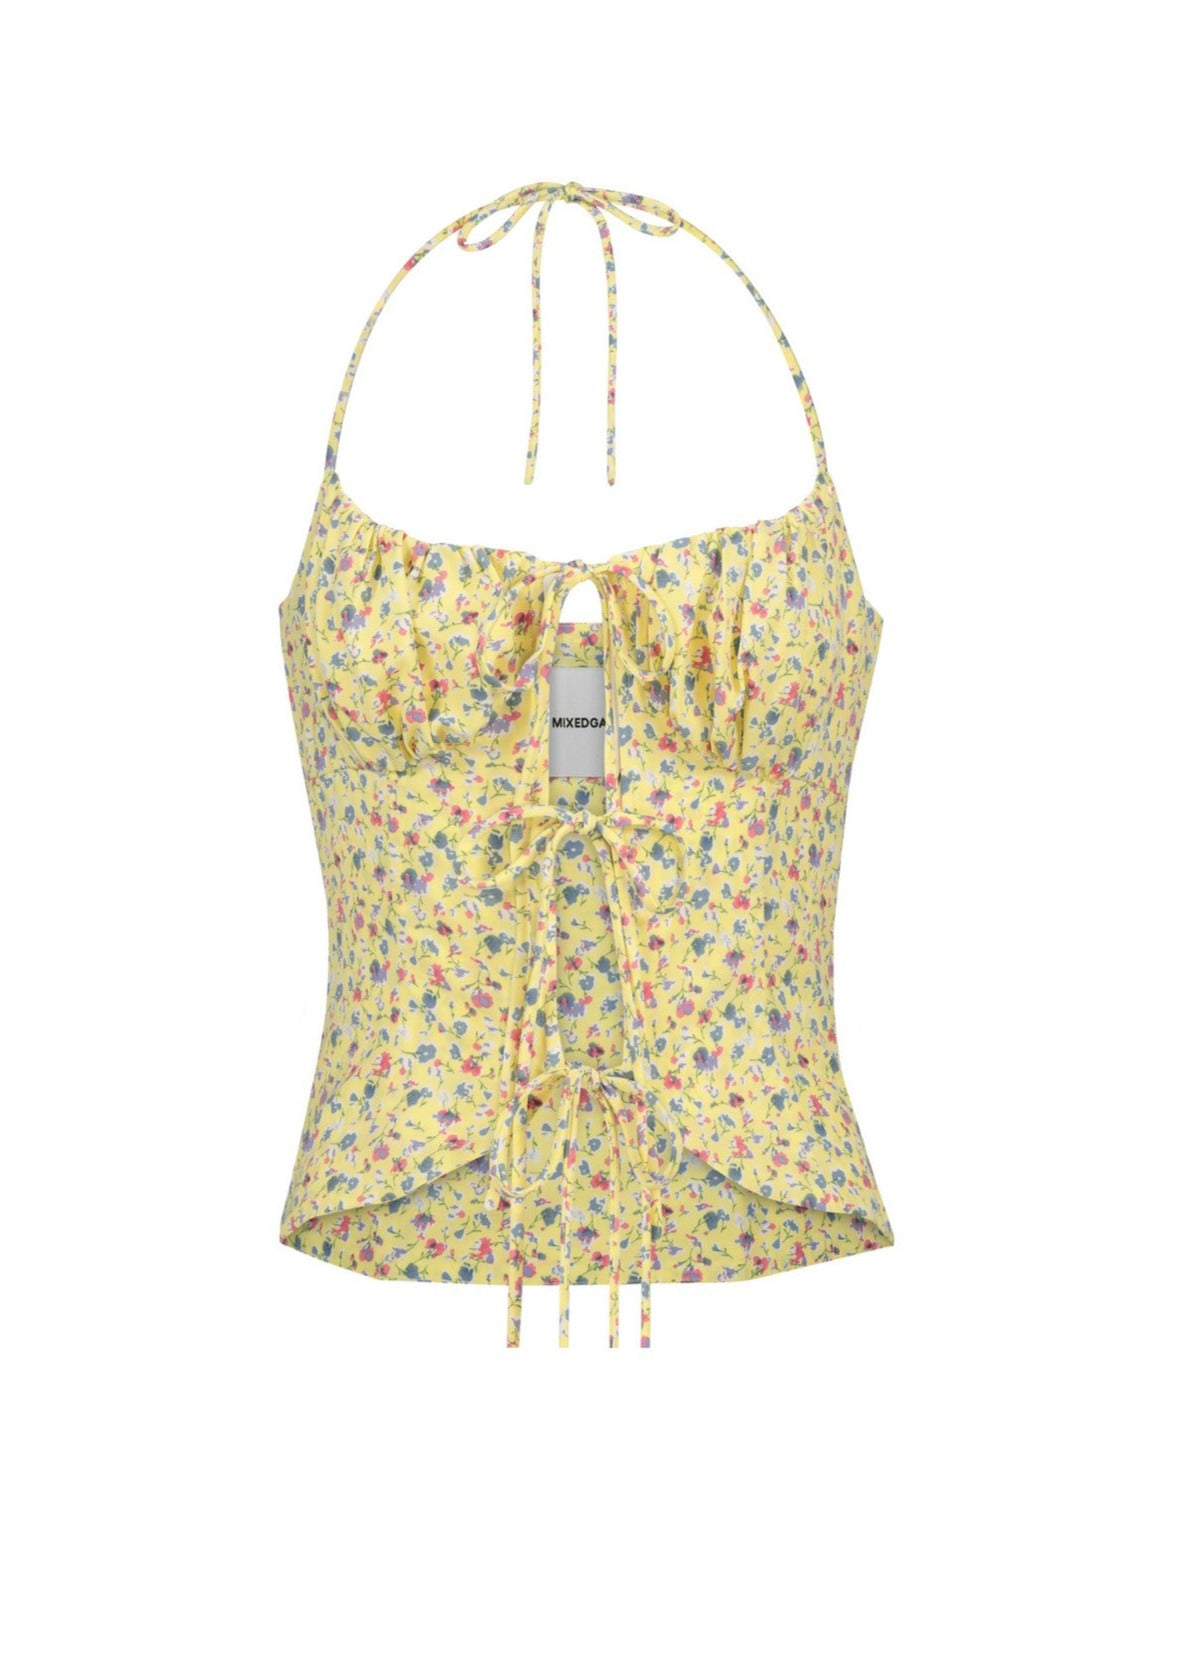 Yellow bustier camisole top from the brand Mixed Gals